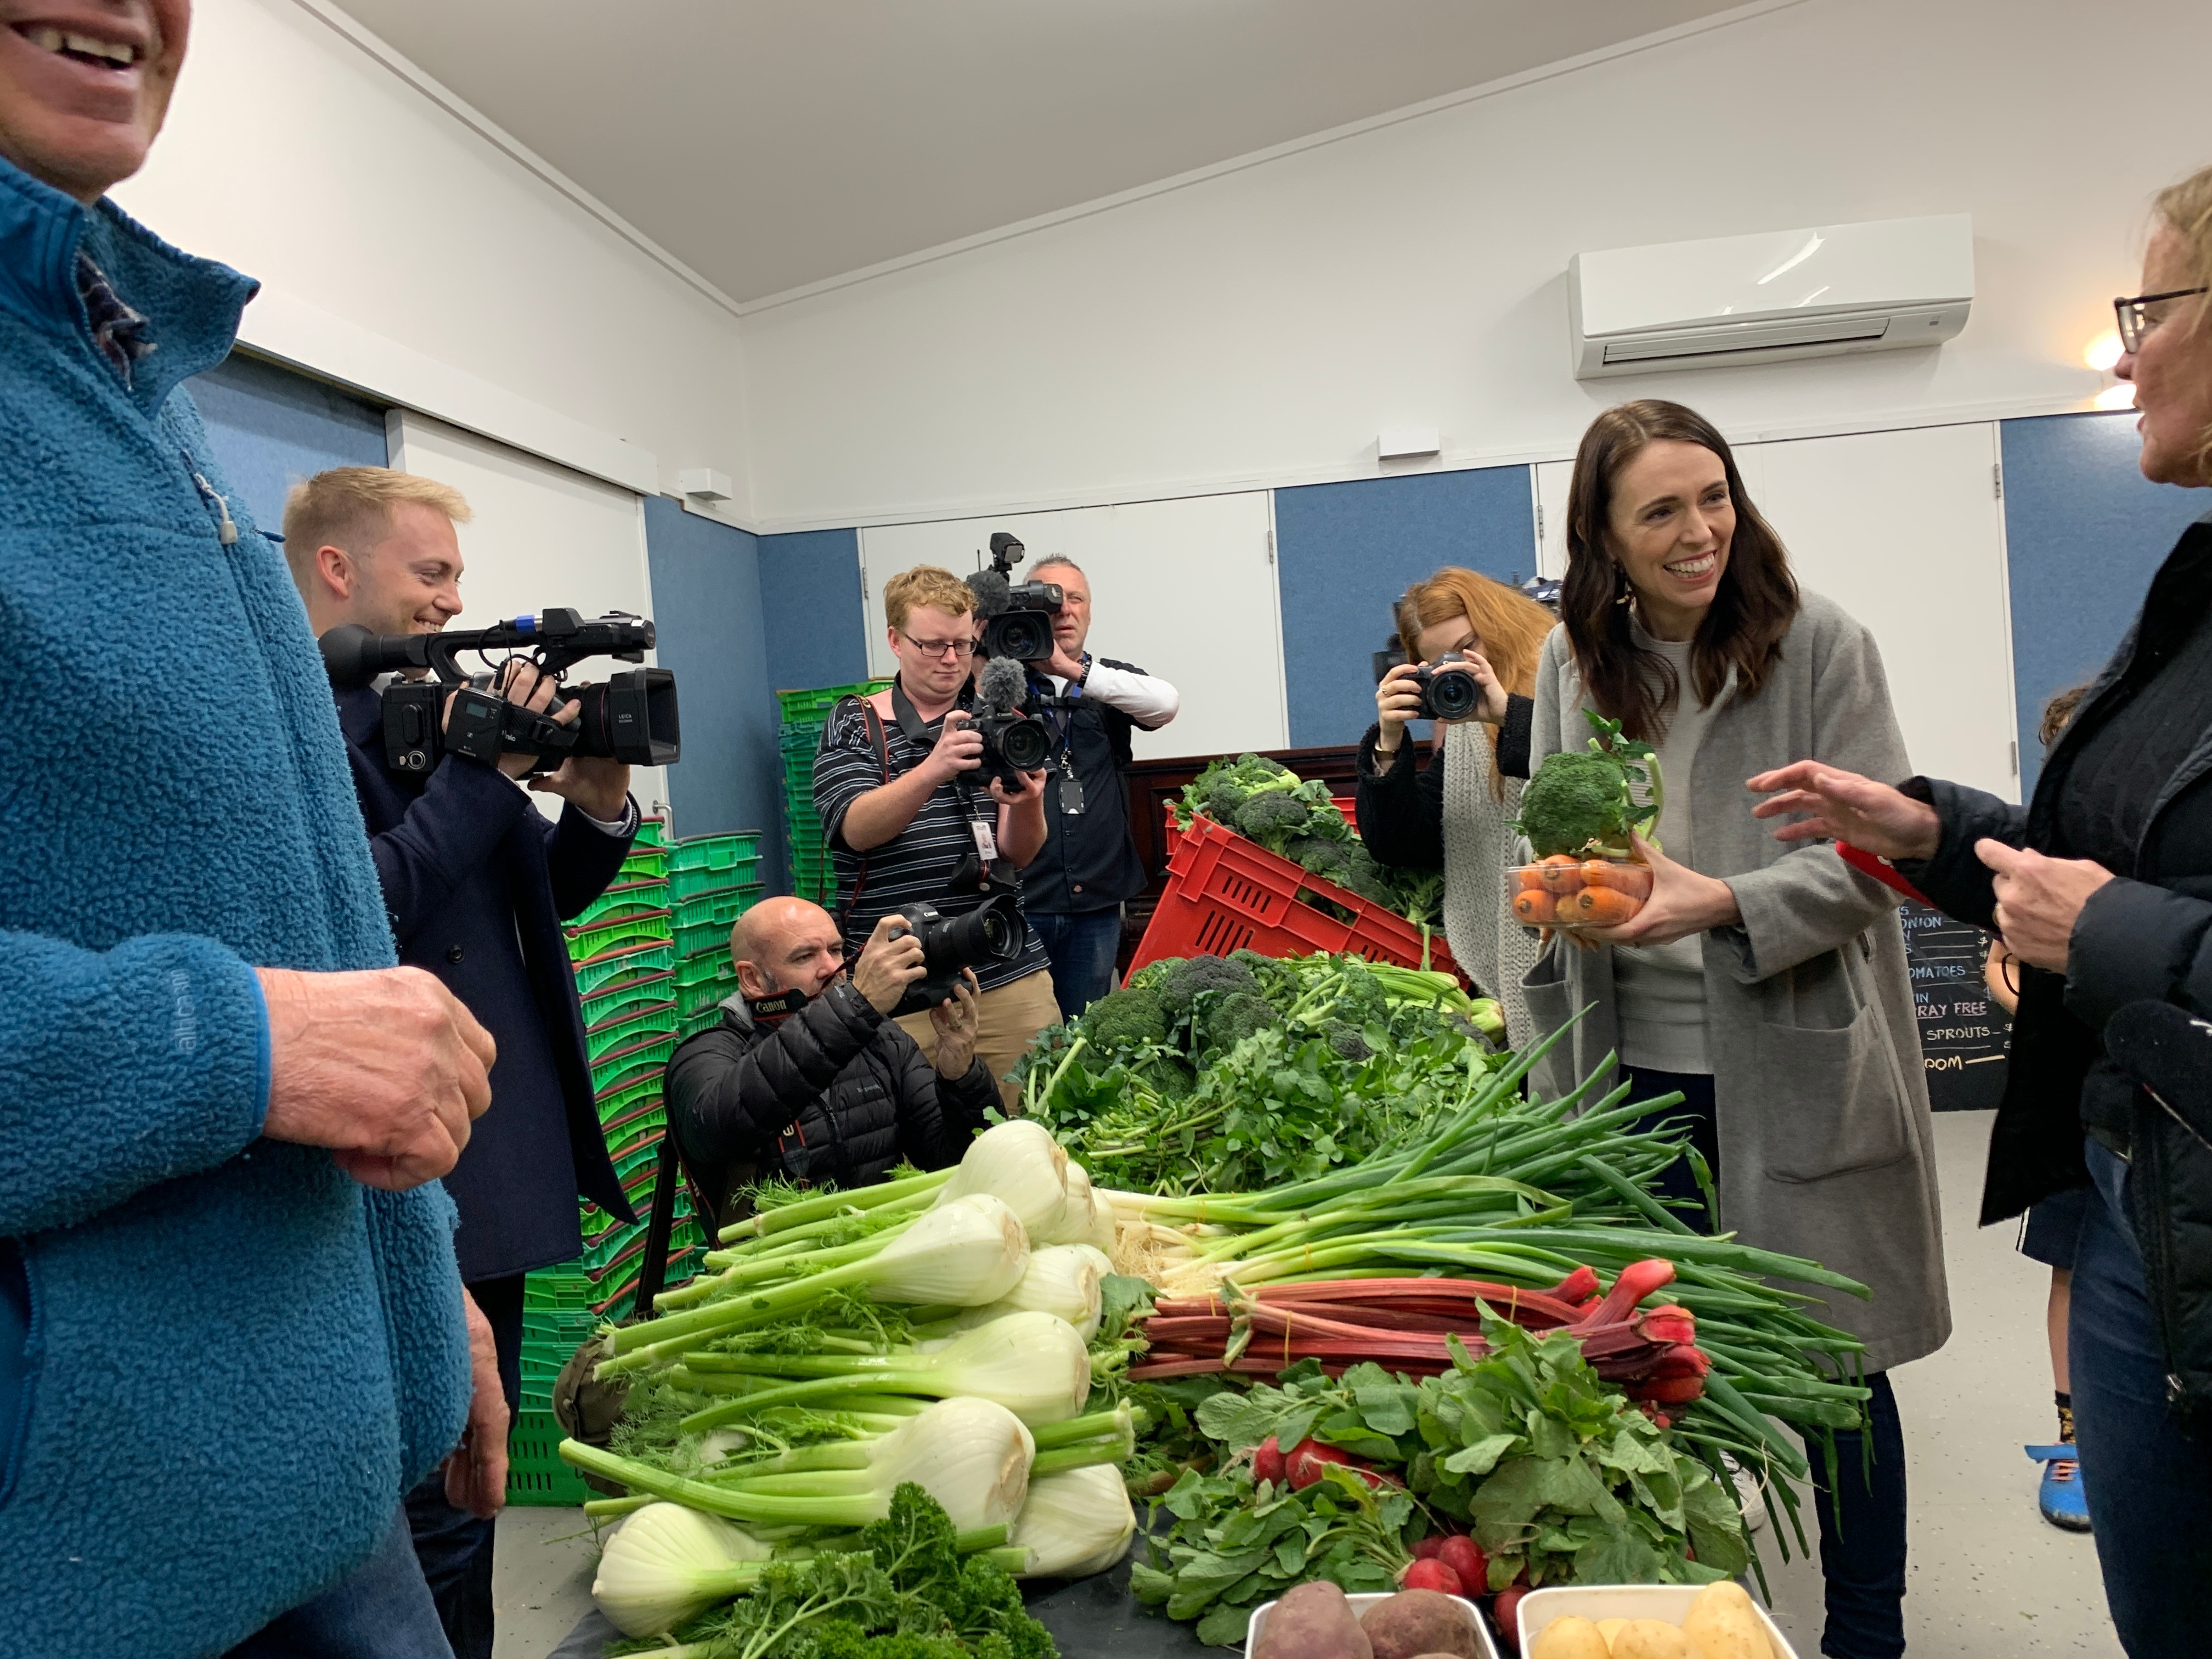 New Zealand Prime Minister Jacinda Ardern campaigns at Grey Lynn Farmers Market in her Auckland electorate of Mount Albert.